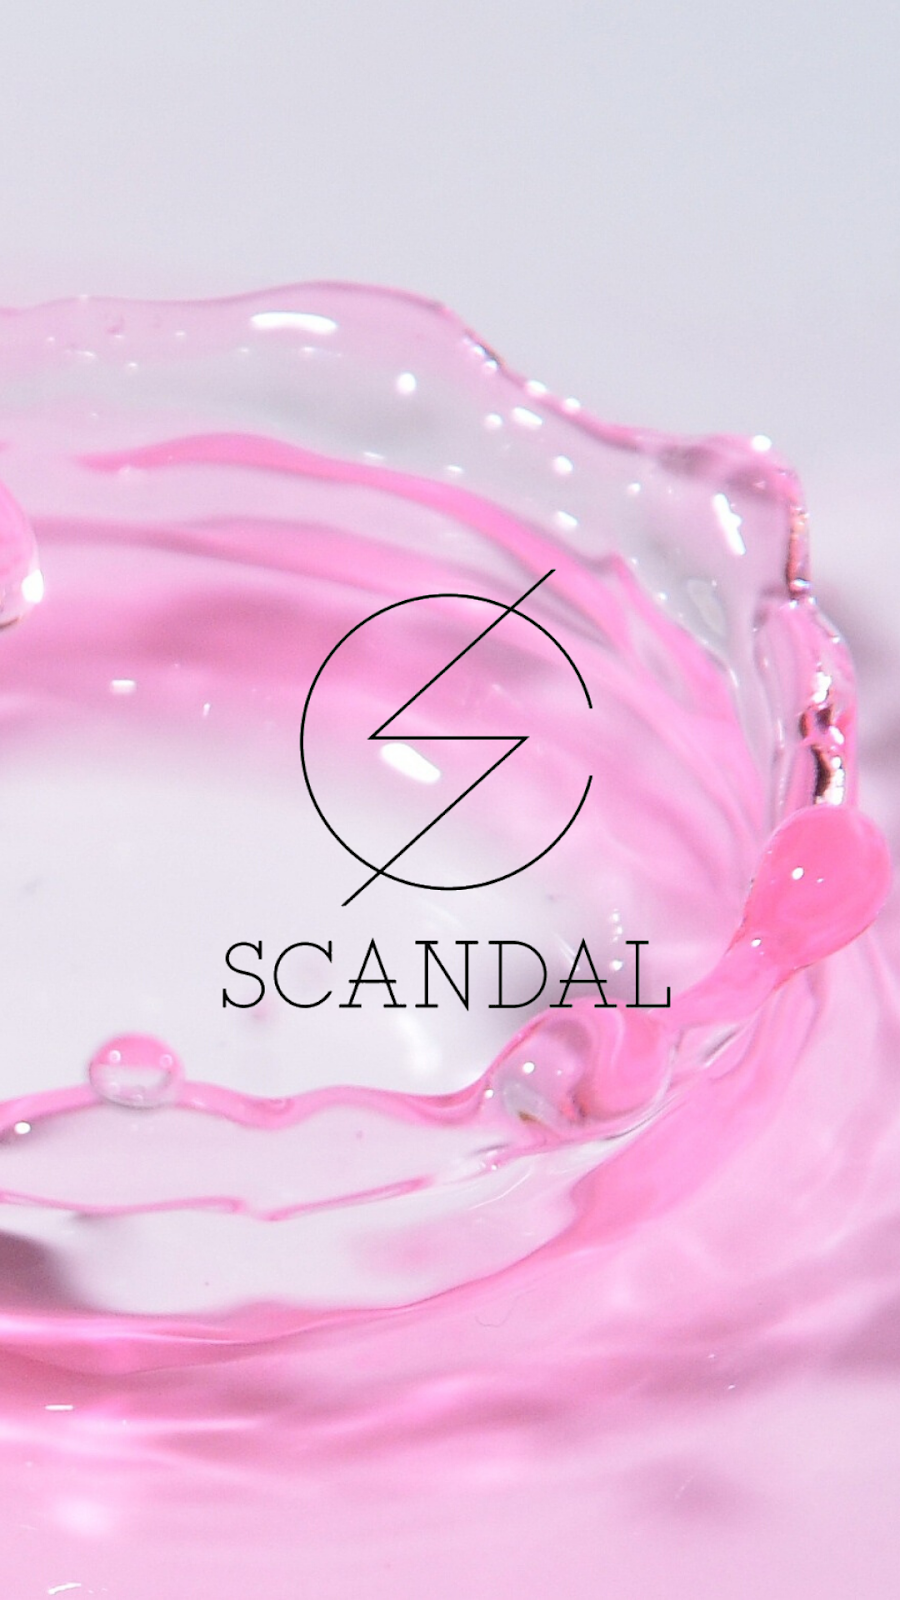 Scandal Japanese Band Wallpaper Hd Collections For Smartphone Part 4 Scandal Japan Band Wallpaper